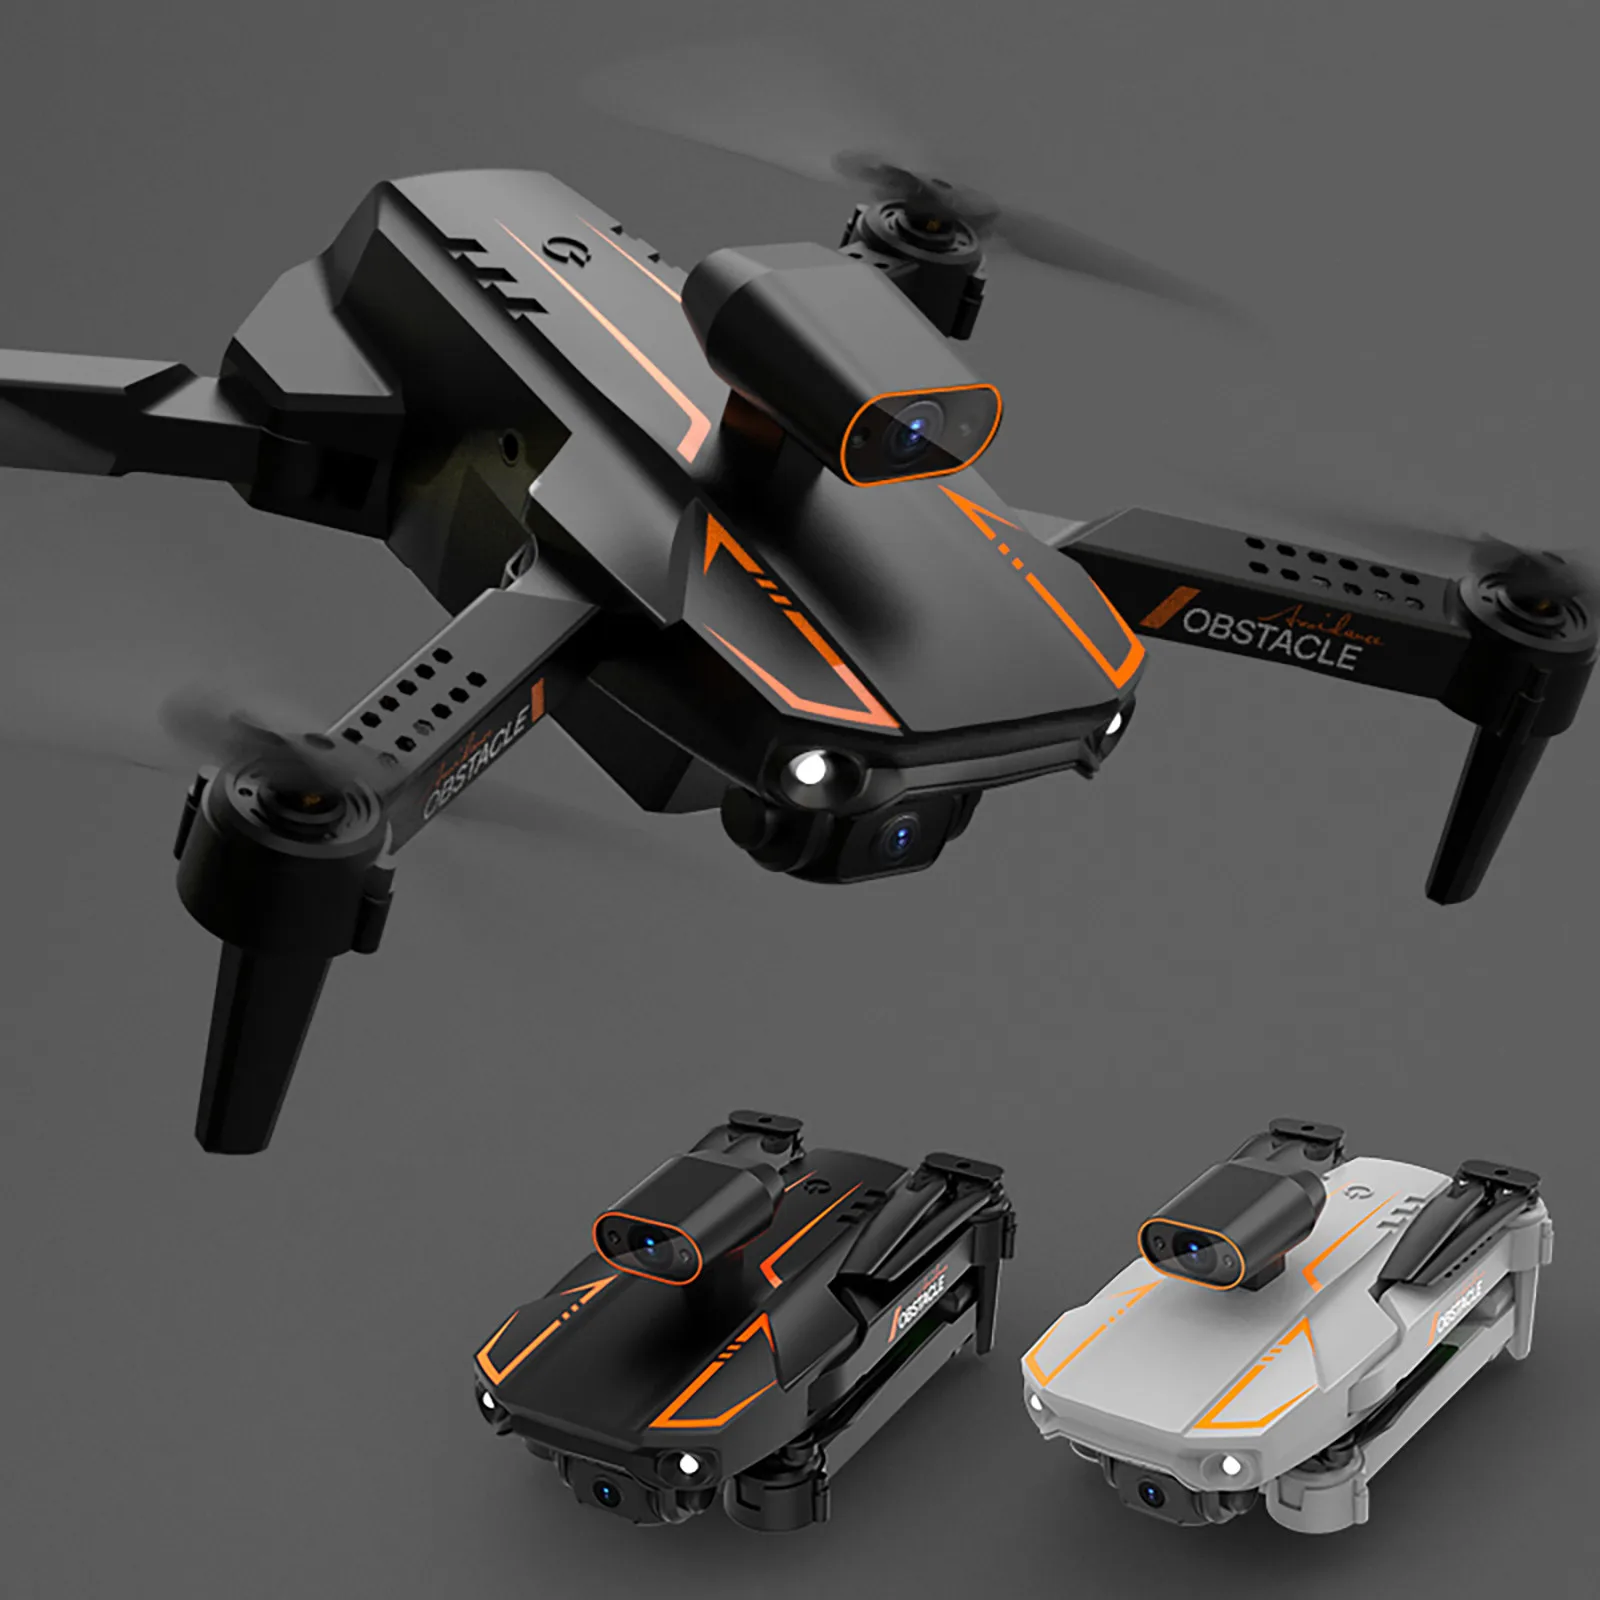 Utoghter S91 Folding Real-time Aerial Photography Four-axis Toy Gift Fixed - £44.90 GBP